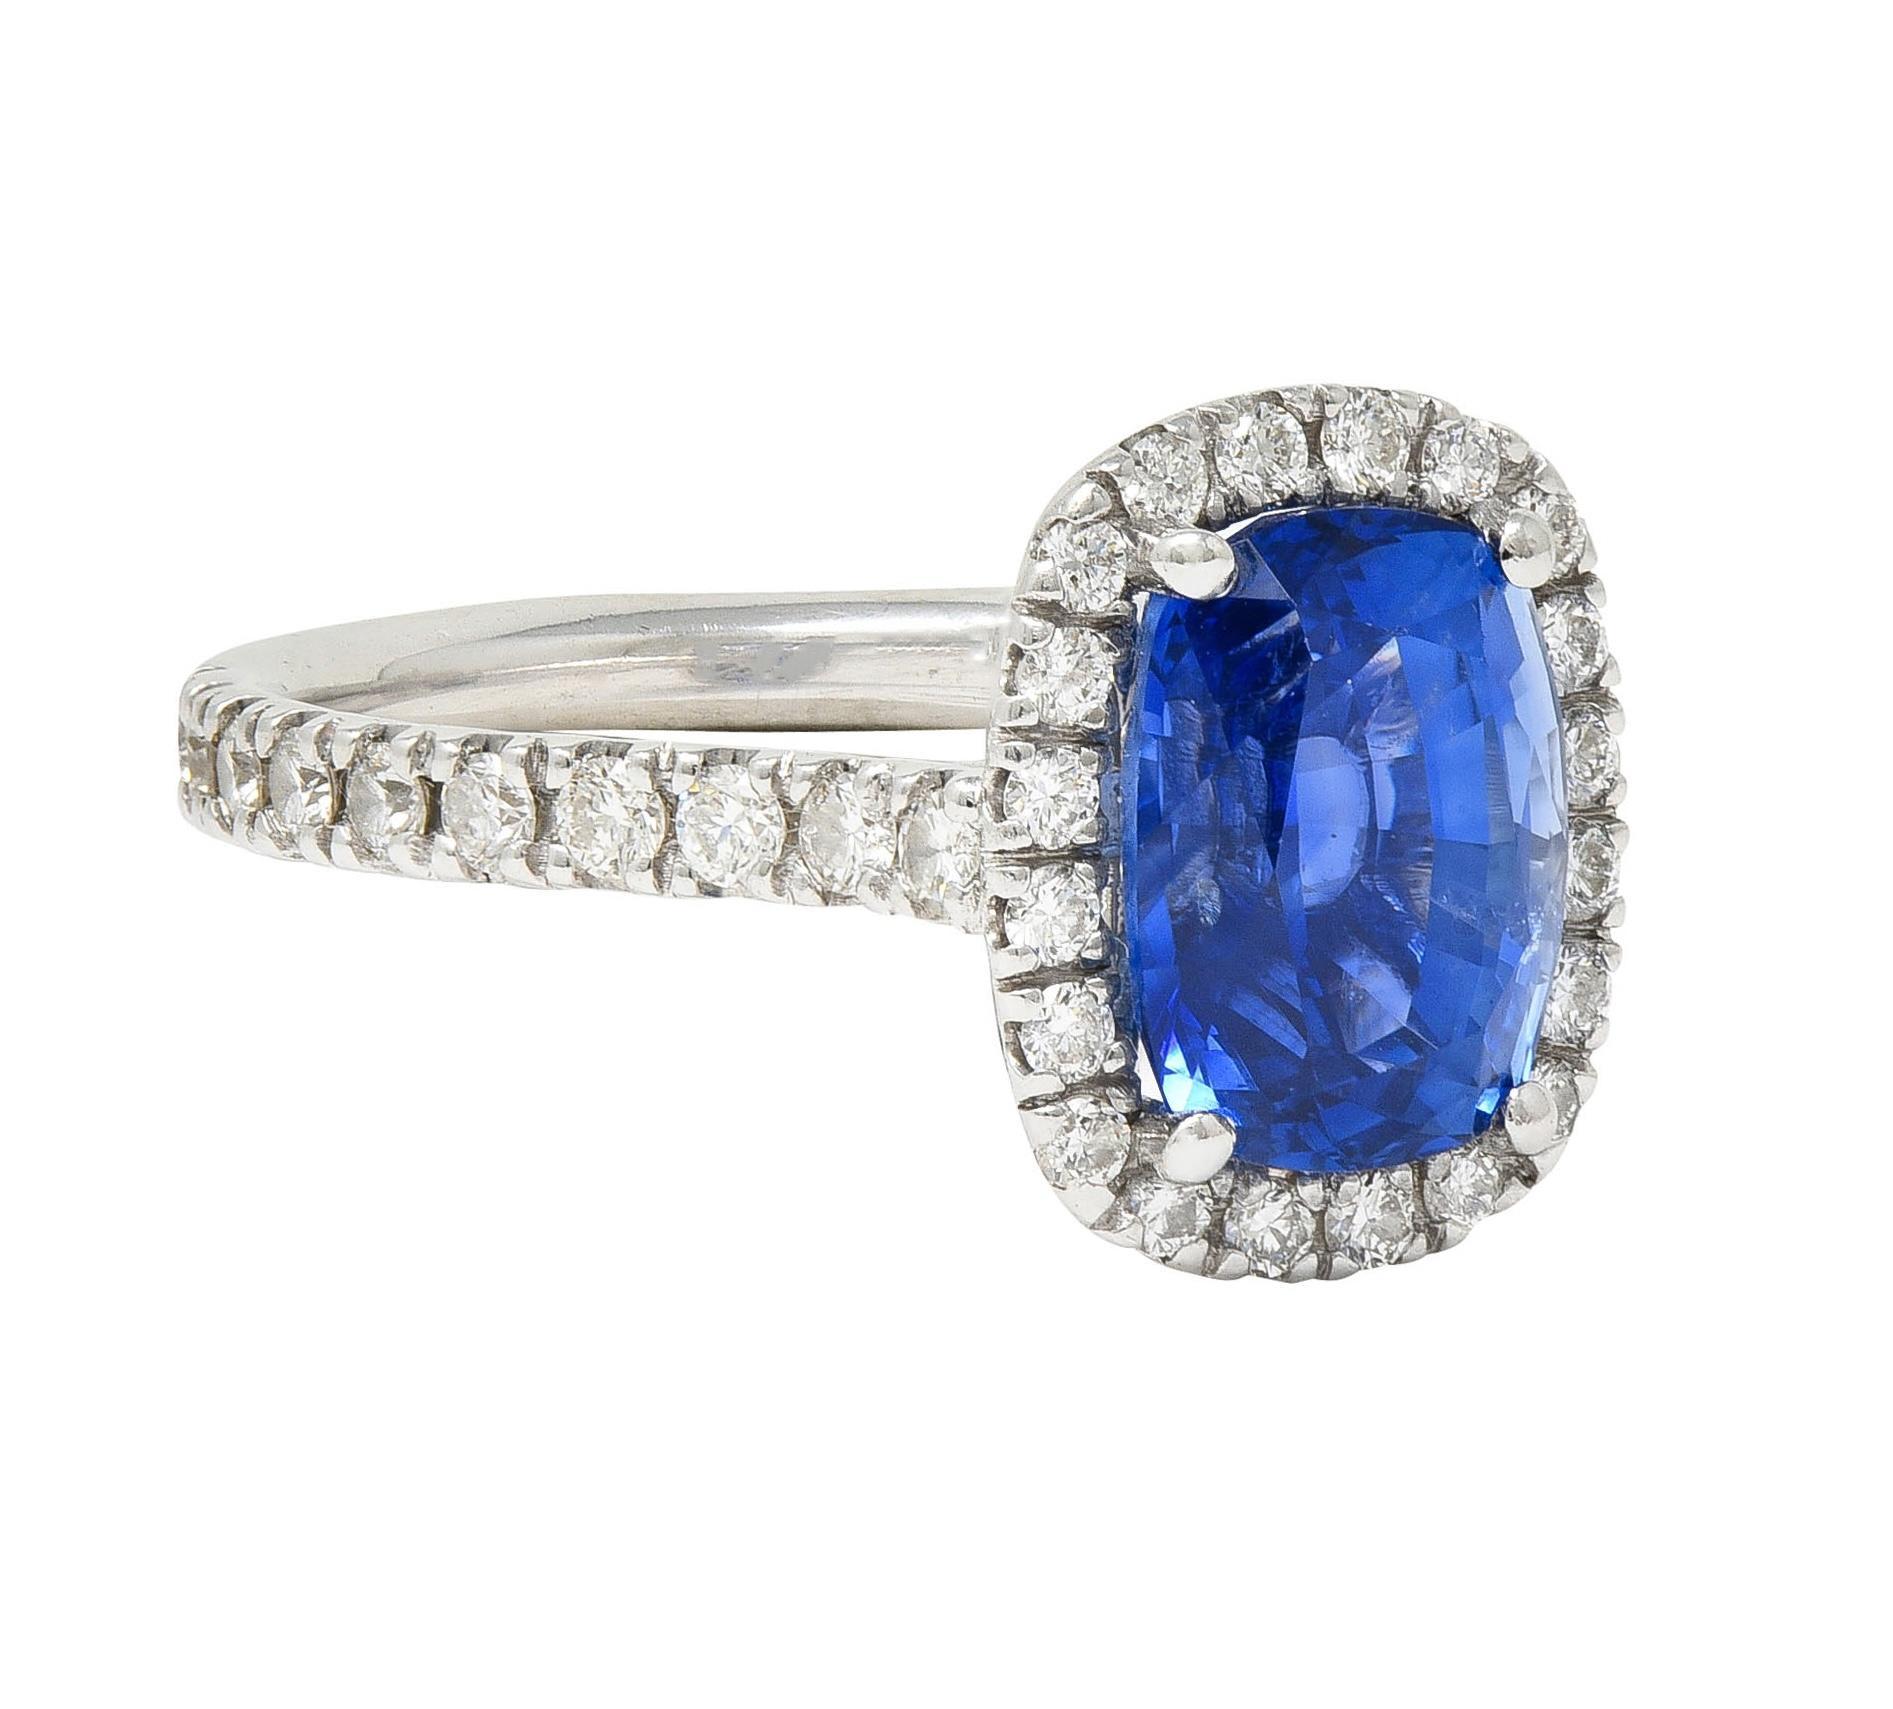 Centering an elongated cushion cut sapphire weighing approximately 3.77 carat total 
Transparent medium vibrant blue in color - prong set in basket 
With a halo surround flanked by pierced cathedral shoulders 
Prong set with round brilliant cut